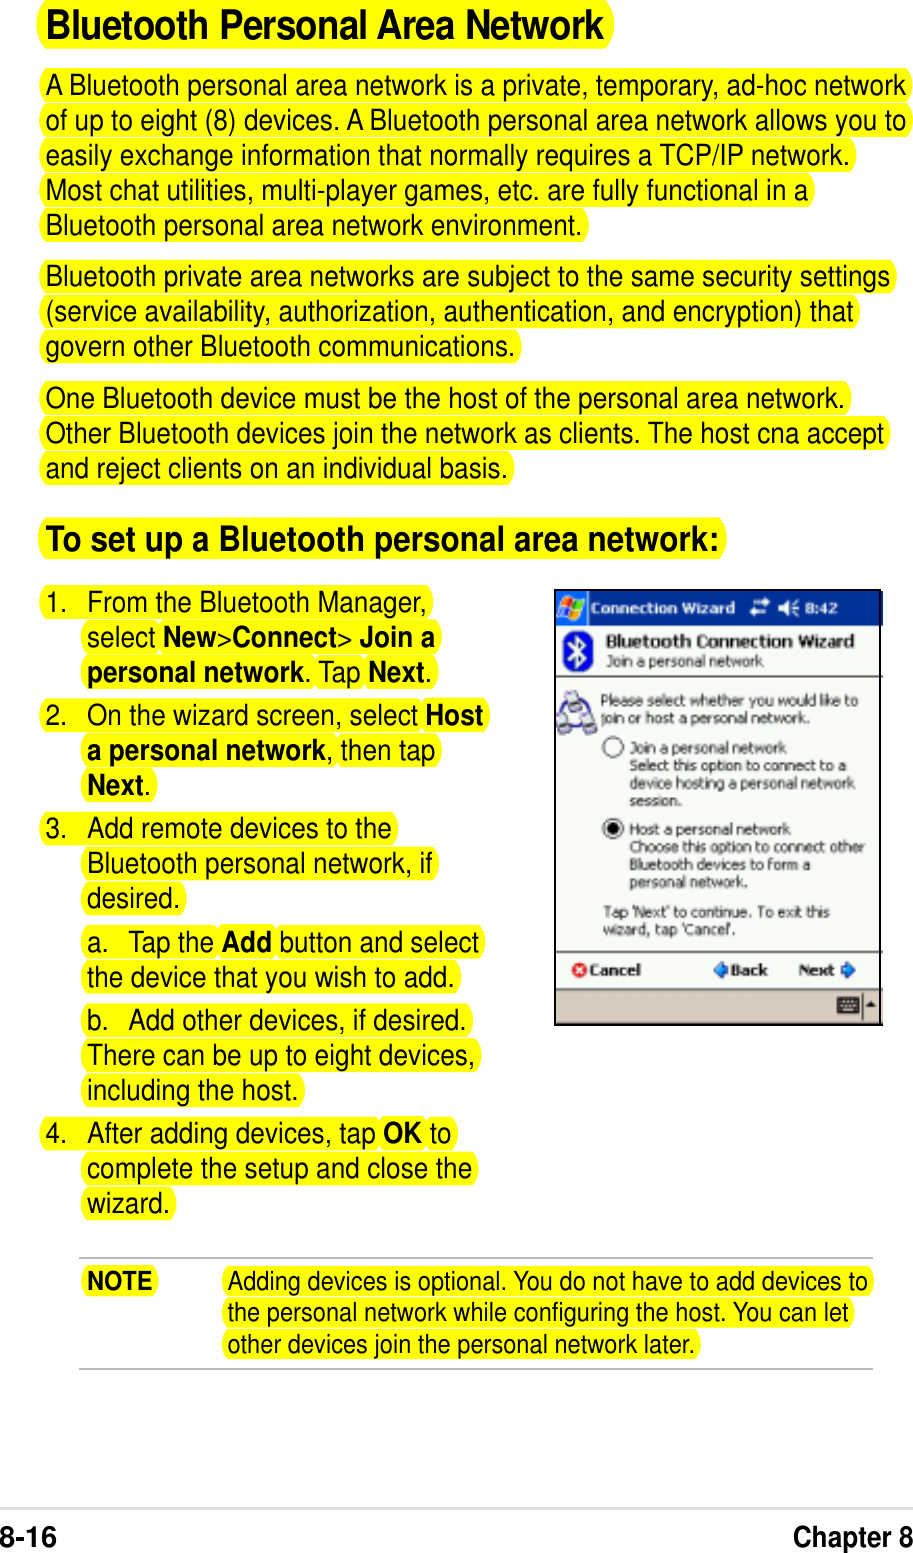 8-16Chapter 8Bluetooth Personal Area NetworkA Bluetooth personal area network is a private, temporary, ad-hoc networkof up to eight (8) devices. A Bluetooth personal area network allows you toeasily exchange information that normally requires a TCP/IP network.Most chat utilities, multi-player games, etc. are fully functional in aBluetooth personal area network environment.Bluetooth private area networks are subject to the same security settings(service availability, authorization, authentication, and encryption) thatgovern other Bluetooth communications.One Bluetooth device must be the host of the personal area network.Other Bluetooth devices join the network as clients. The host cna acceptand reject clients on an individual basis.To set up a Bluetooth personal area network:1. From the Bluetooth Manager,select New&gt;Connect&gt; Join apersonal network. Tap Next.2. On the wizard screen, select Hosta personal network, then tapNext.3. Add remote devices to theBluetooth personal network, ifdesired.a. Tap the Add button and selectthe device that you wish to add.b. Add other devices, if desired.There can be up to eight devices,including the host.4. After adding devices, tap OK tocomplete the setup and close thewizard.NOTE Adding devices is optional. You do not have to add devices tothe personal network while configuring the host. You can letother devices join the personal network later.